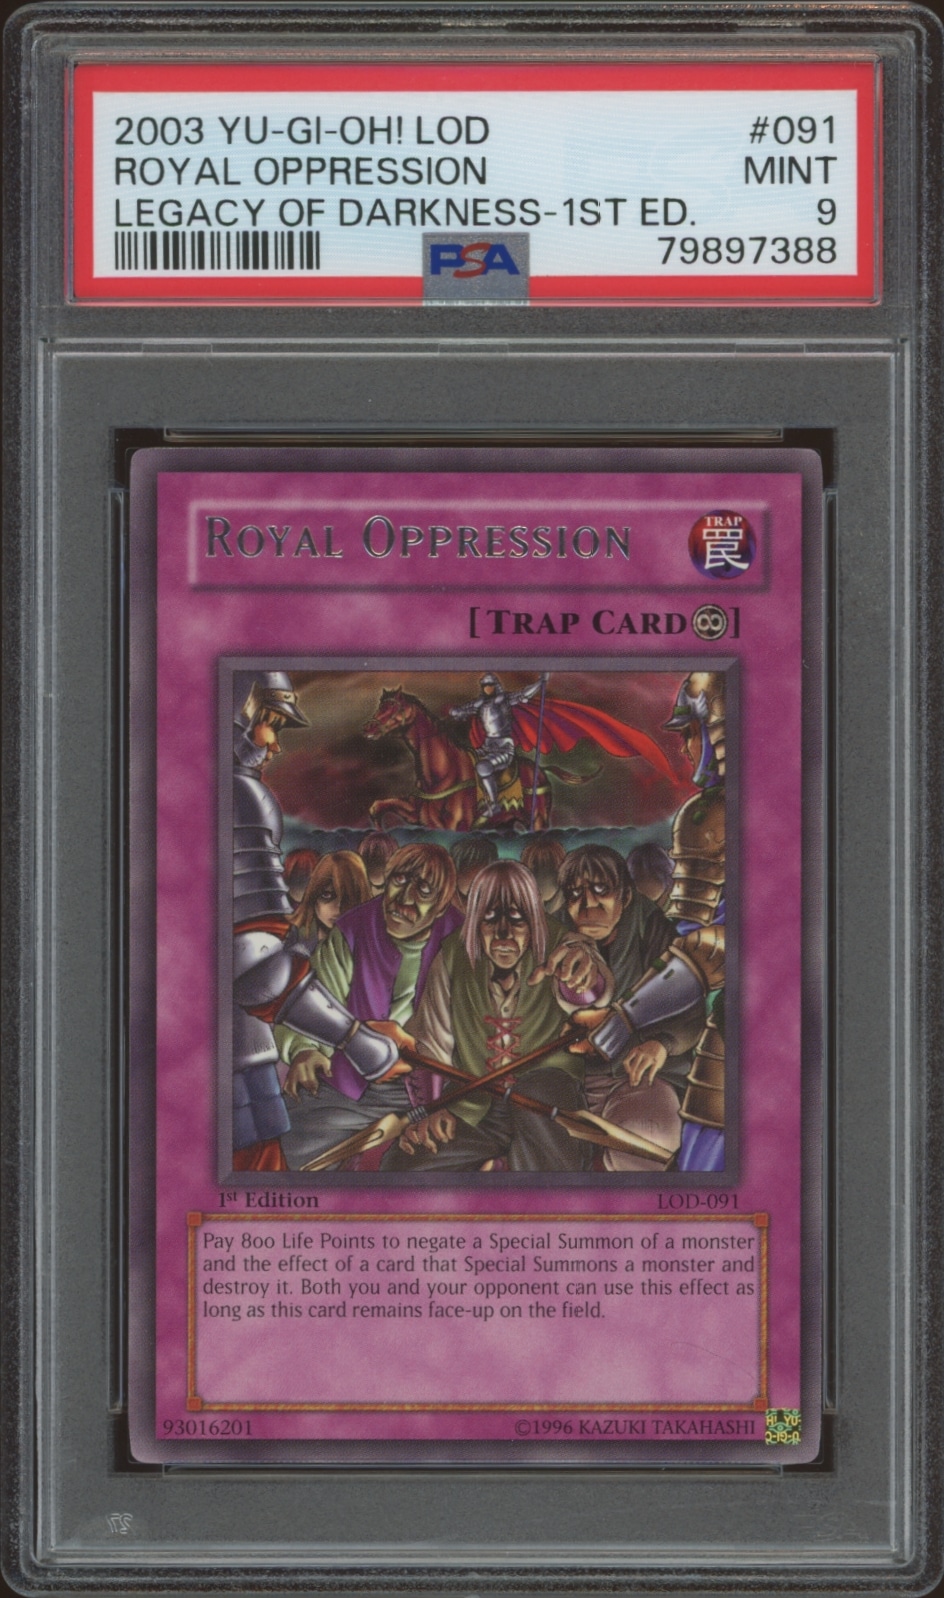 PSA-graded Mint 9, 2003 Yu-Gi-Oh! 1st Edition Royal Oppression card from Legacy of Darkness series.